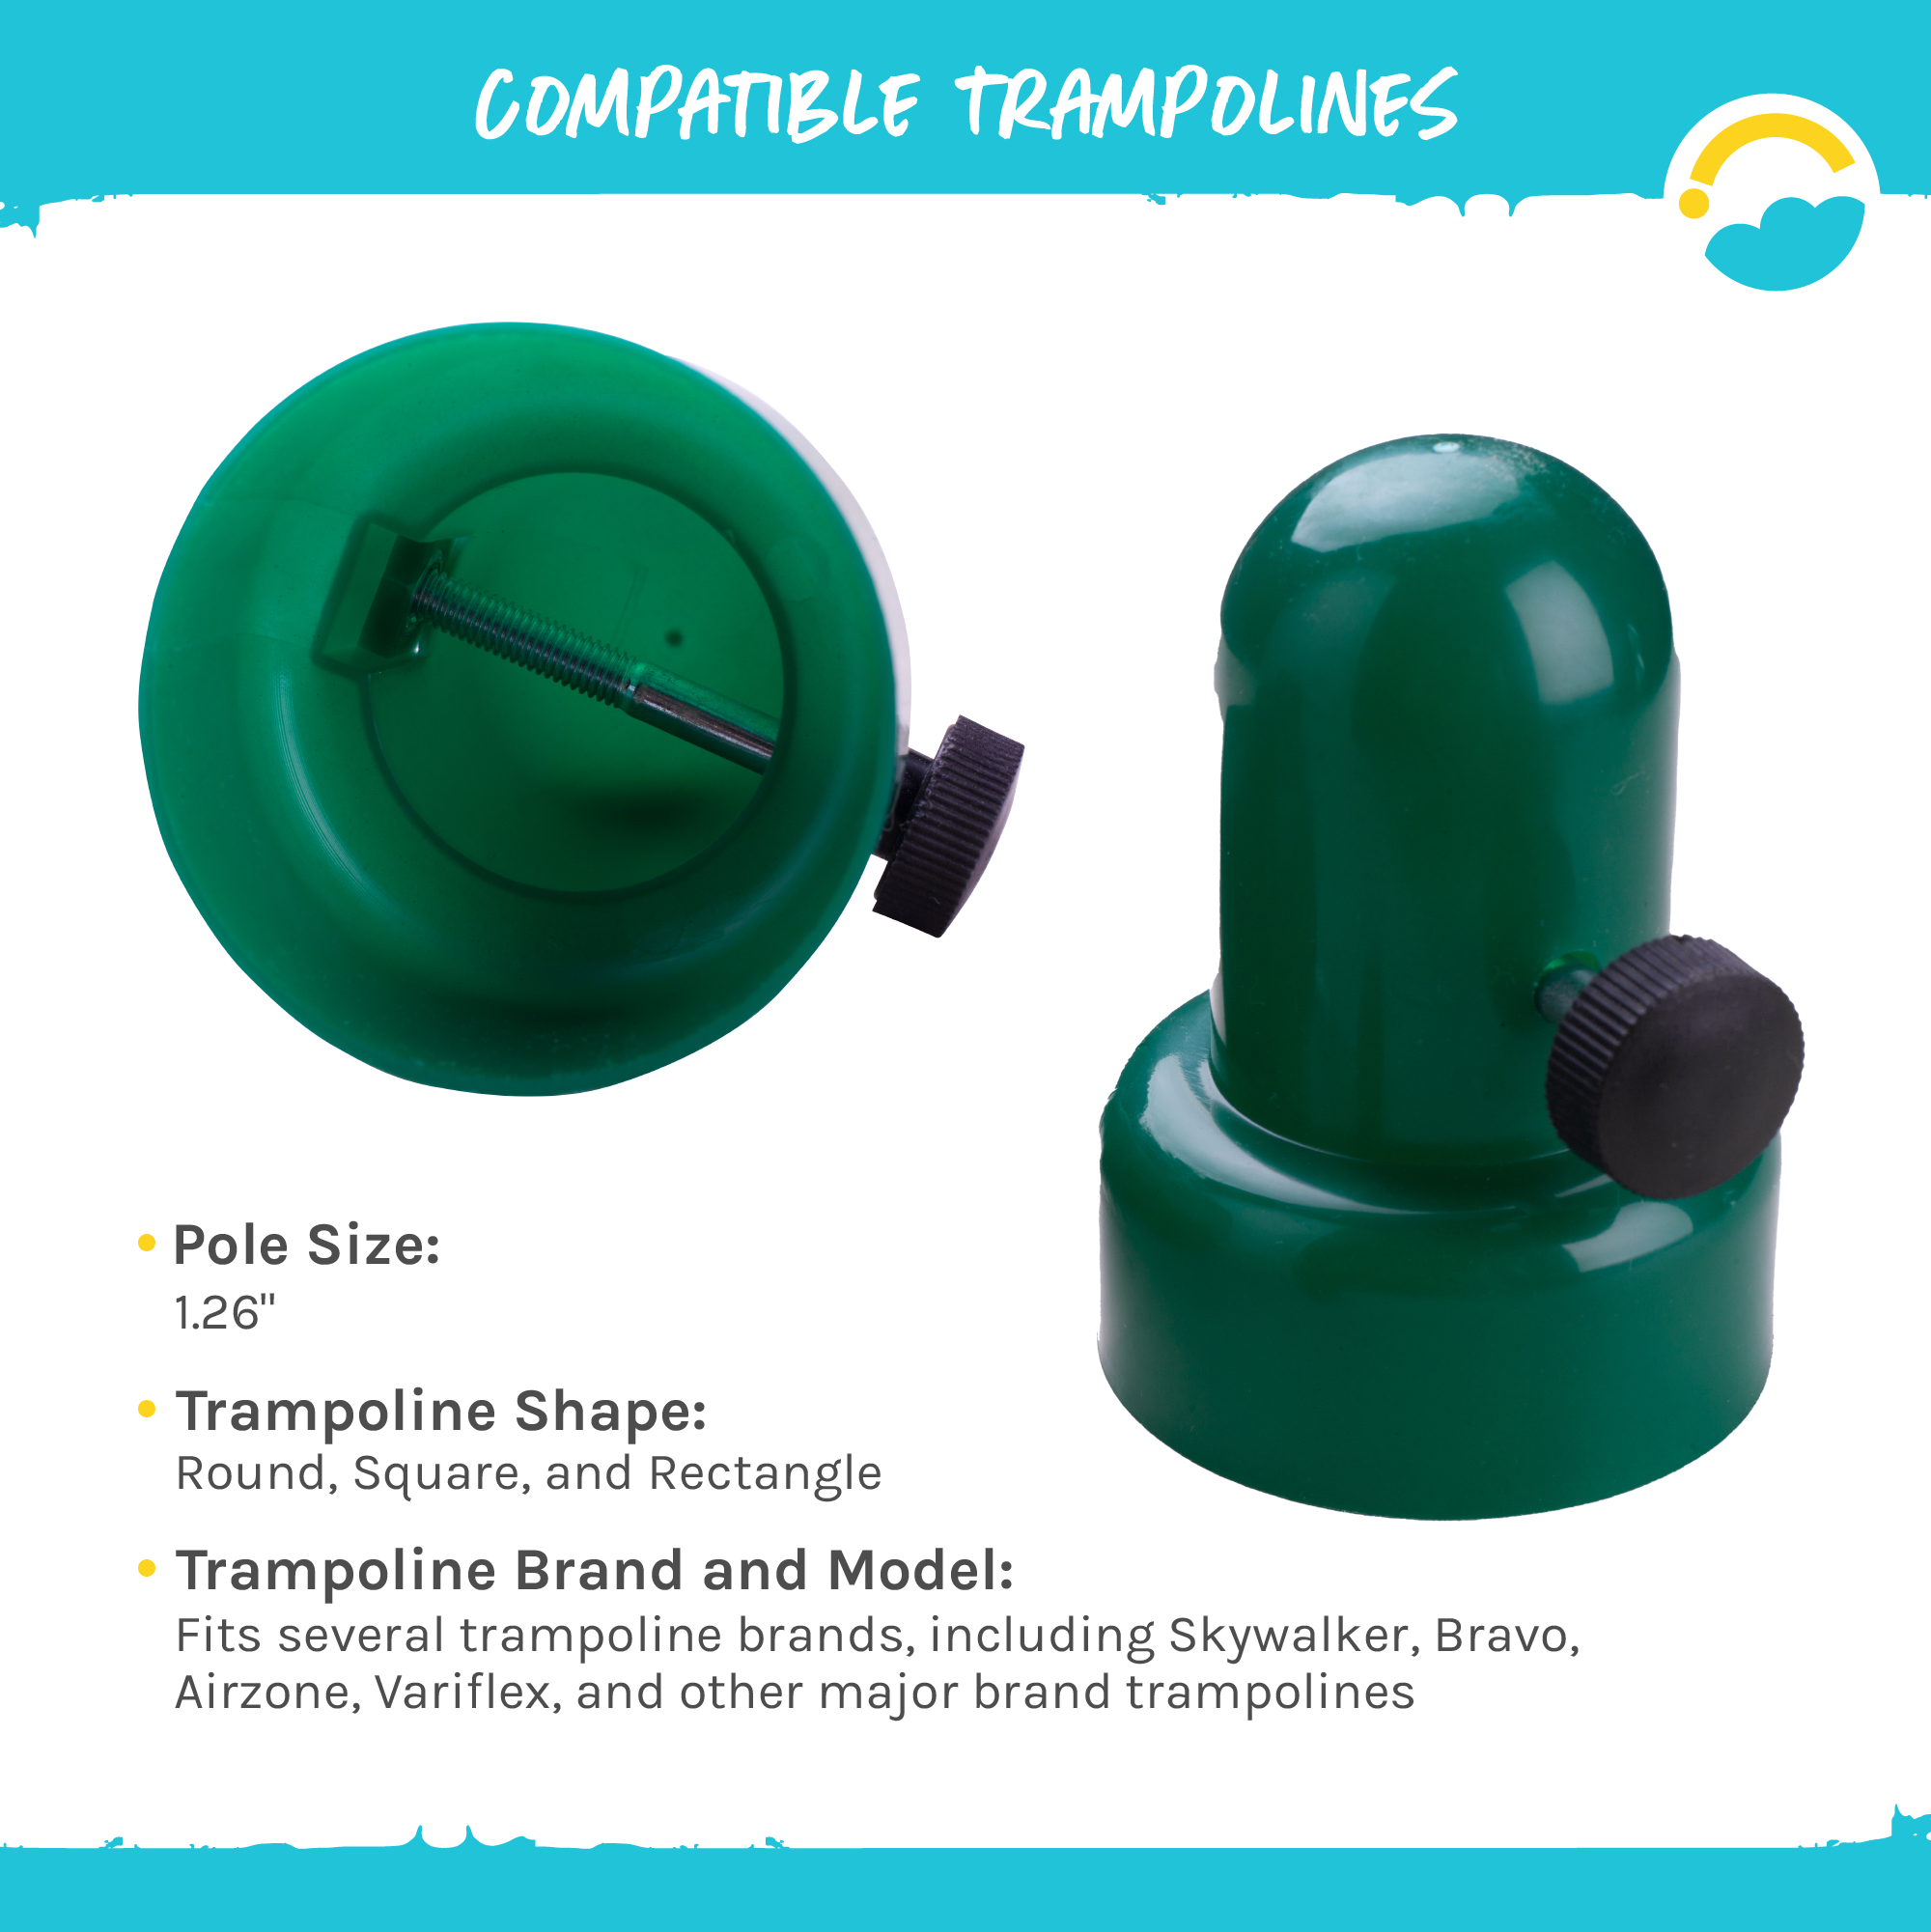 Compatible Trampolines:  Pole Size: 1.26".  Trampoline Shape: Round, Square, and Rectangle.  Trampoline Brand and Model: Fits several trampoline brands, including Skywalker, Bravo, Airzone, Variflex, and other major brand trampolines.  